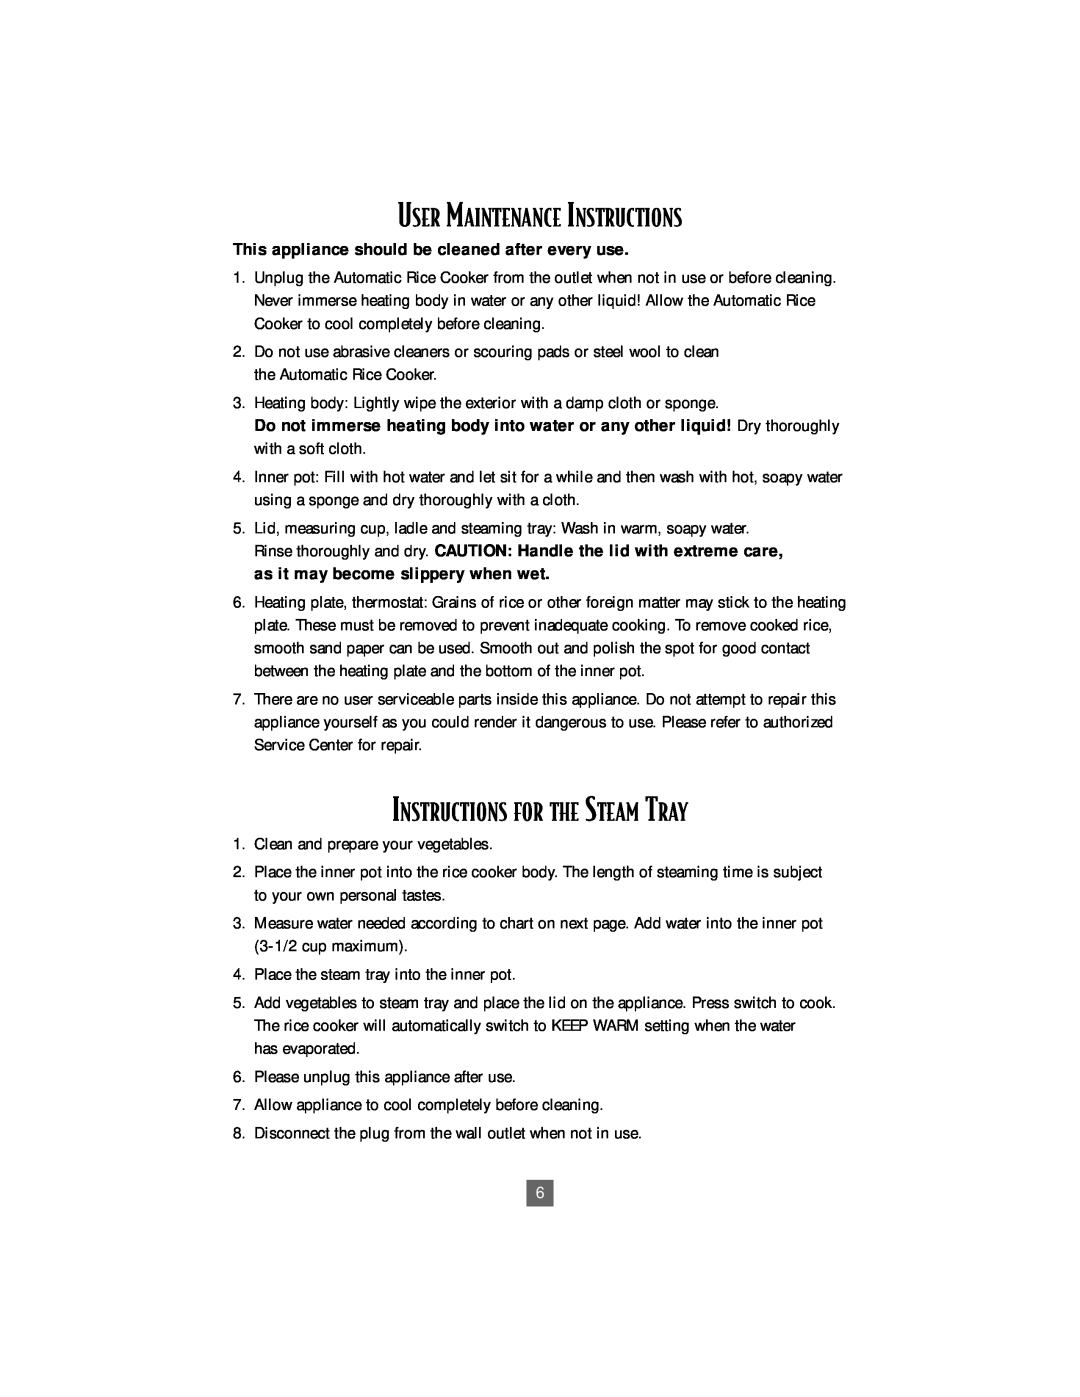 Oster 4718 instruction manual User Maintenance Instructions, Instructions For The Steam Tray 